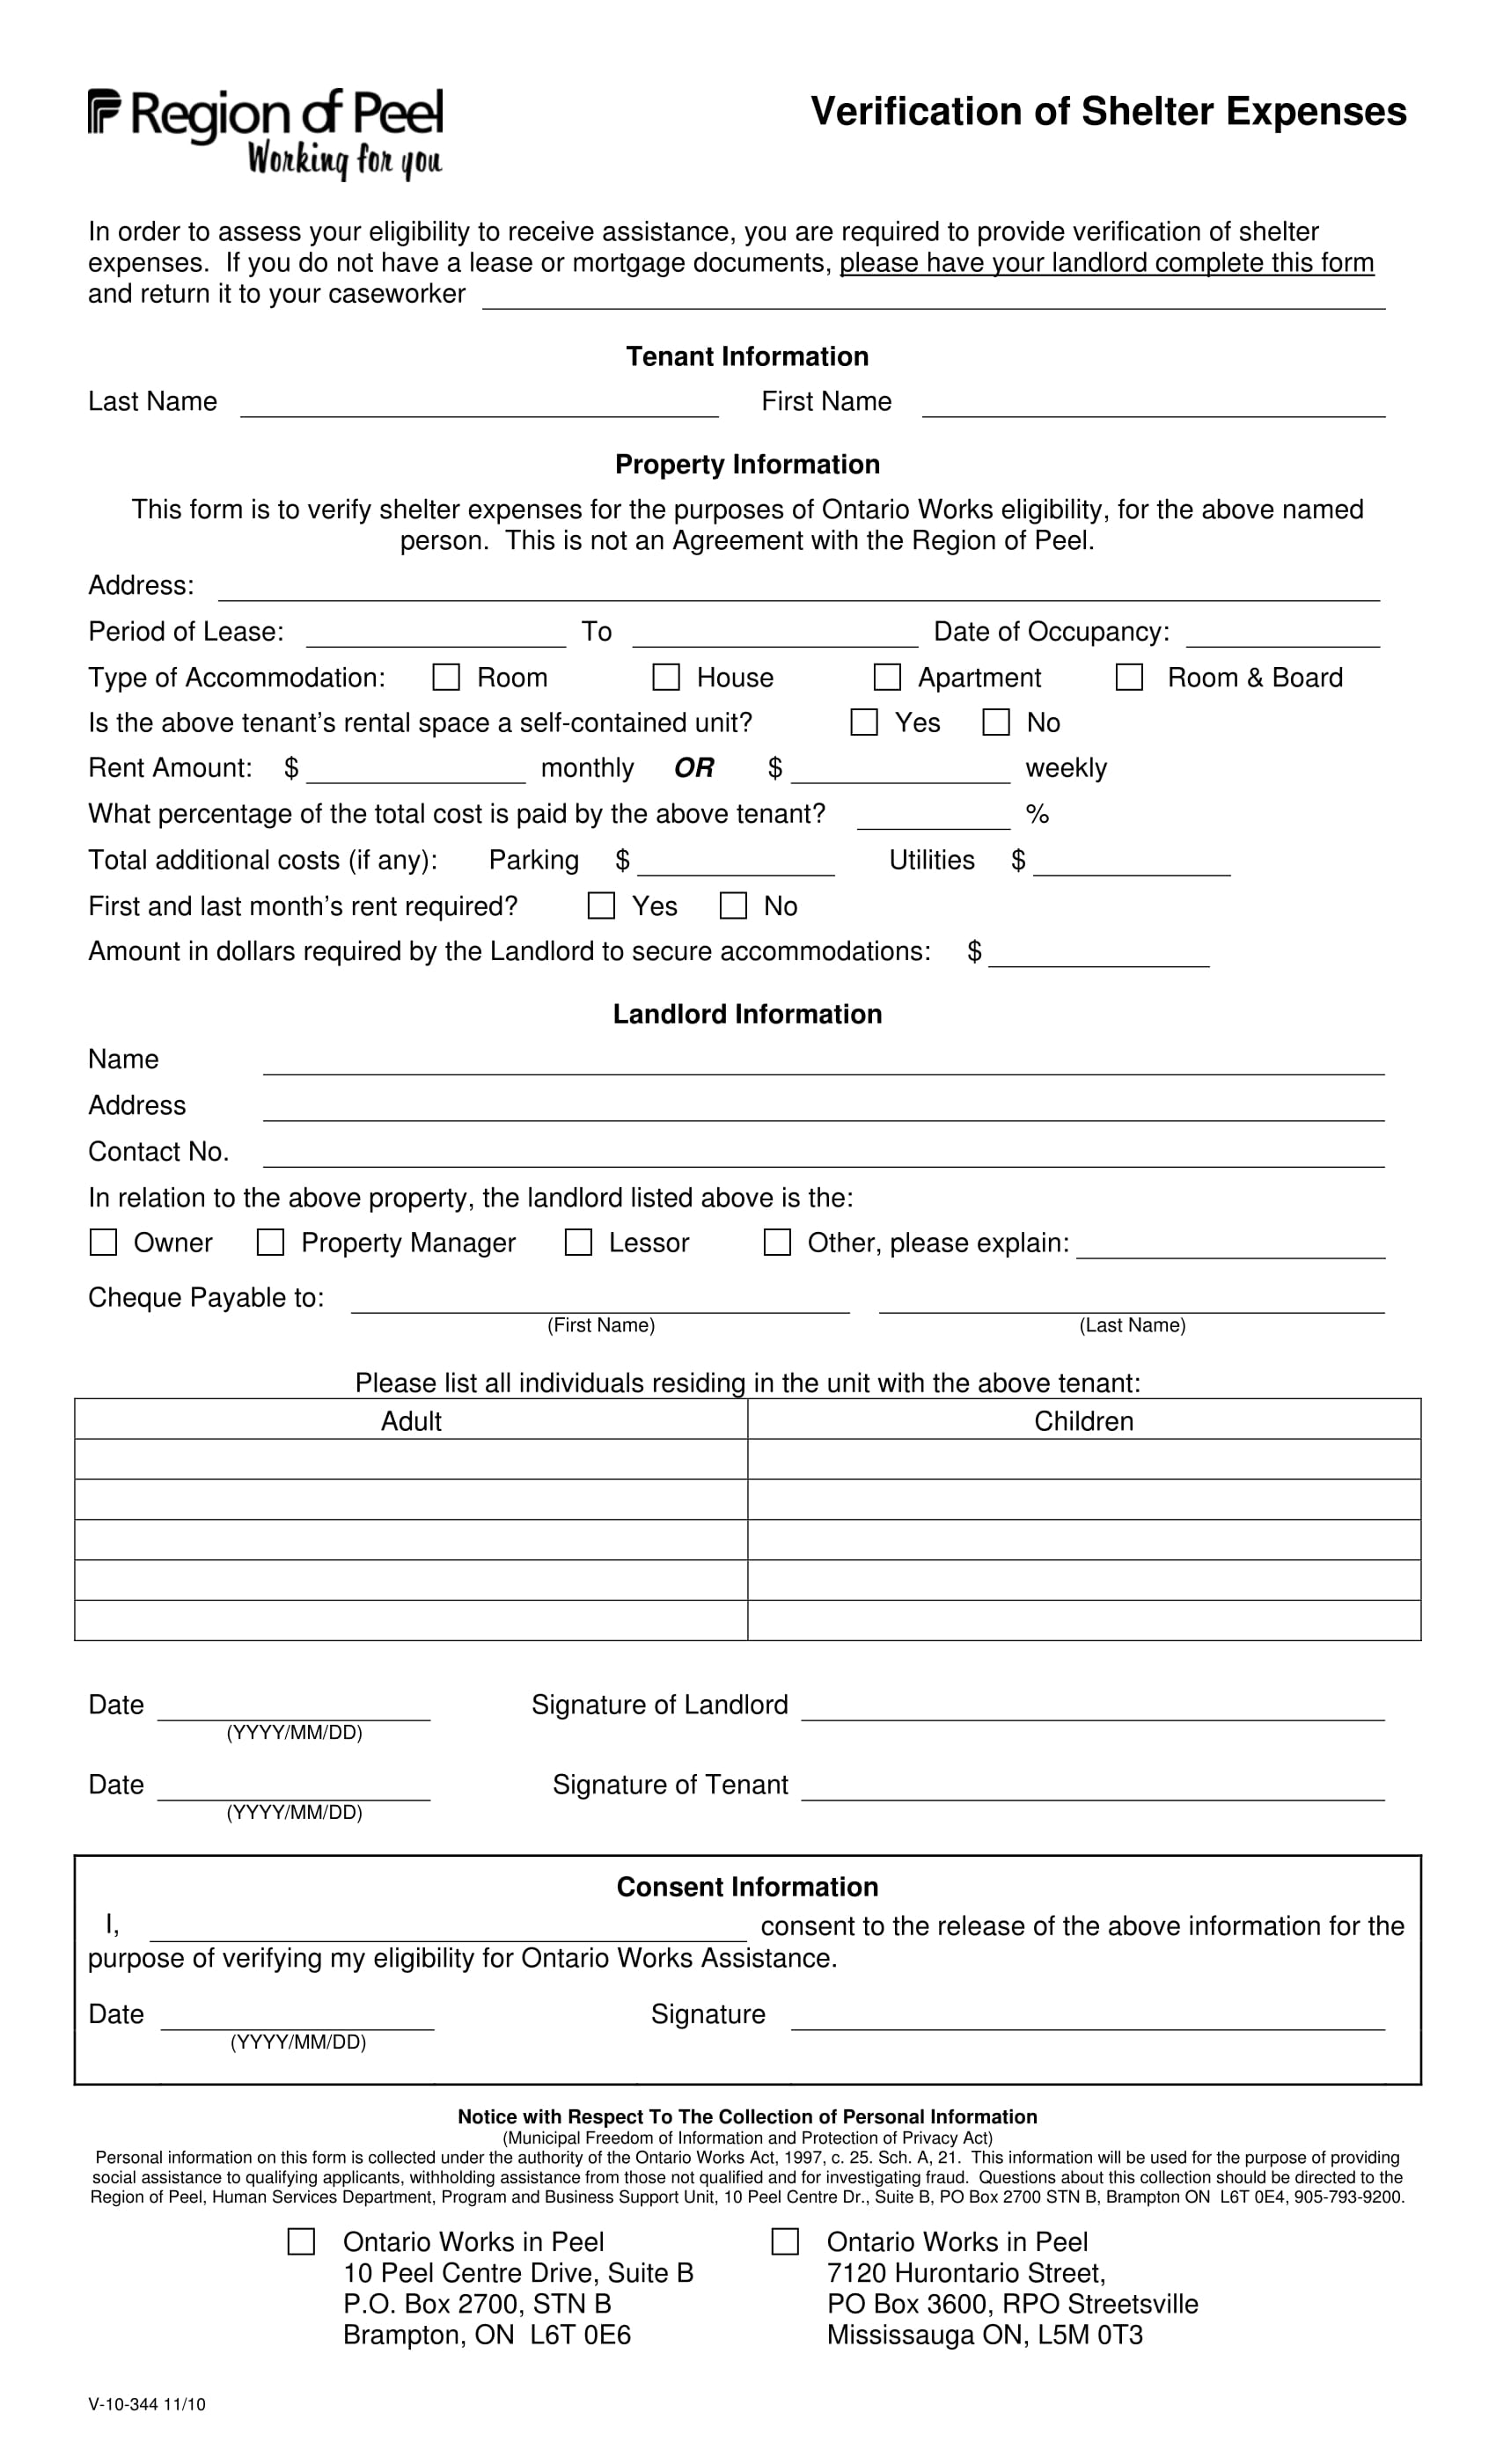 verification of shelter expenses form 1